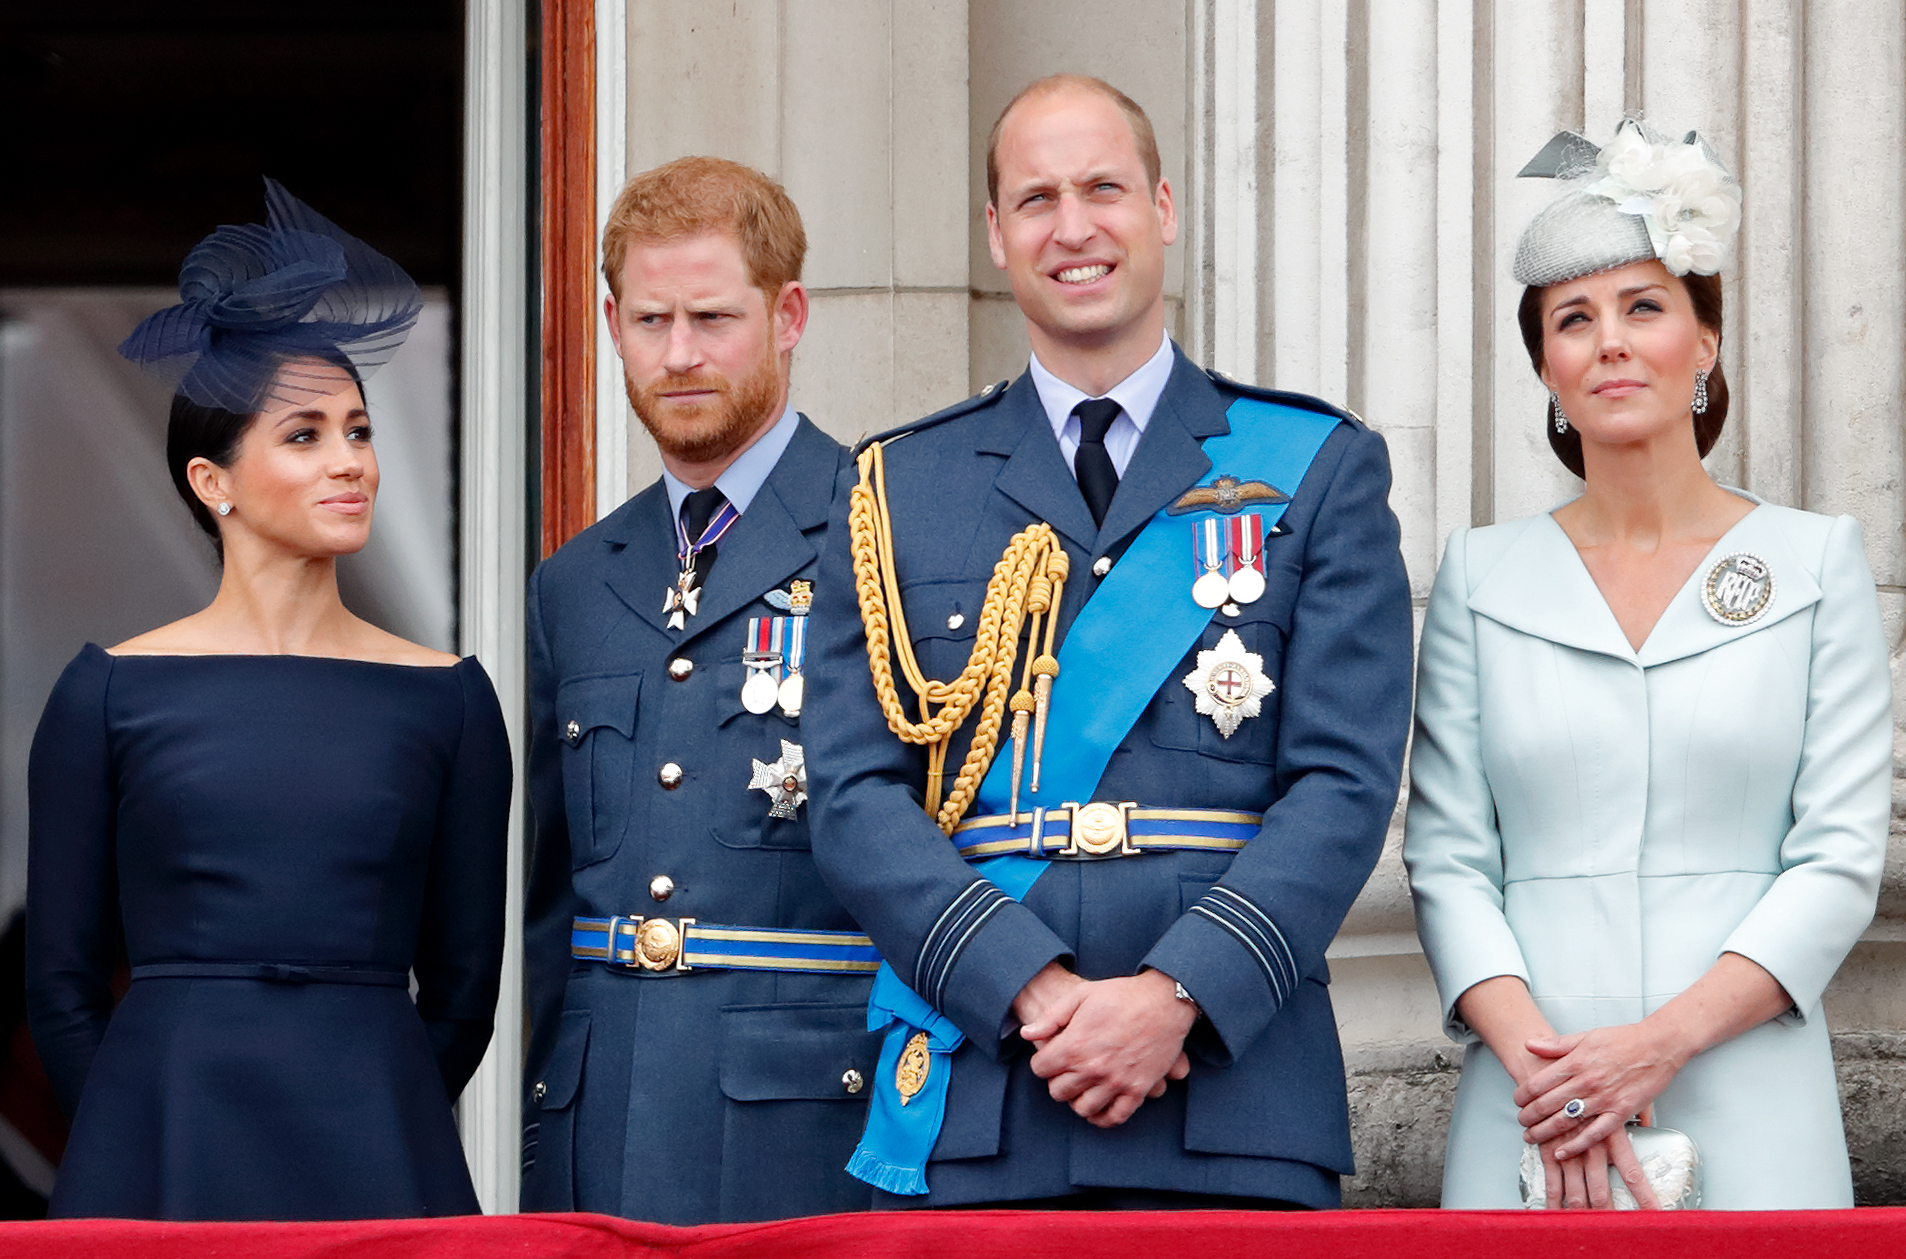 Meghan Markle, Prince Harry, Prince William, and Kate Middleton watch a flypast from the balcony of Buckingham Palace on July 10, 2018 in London, England. | Source: Getty Images